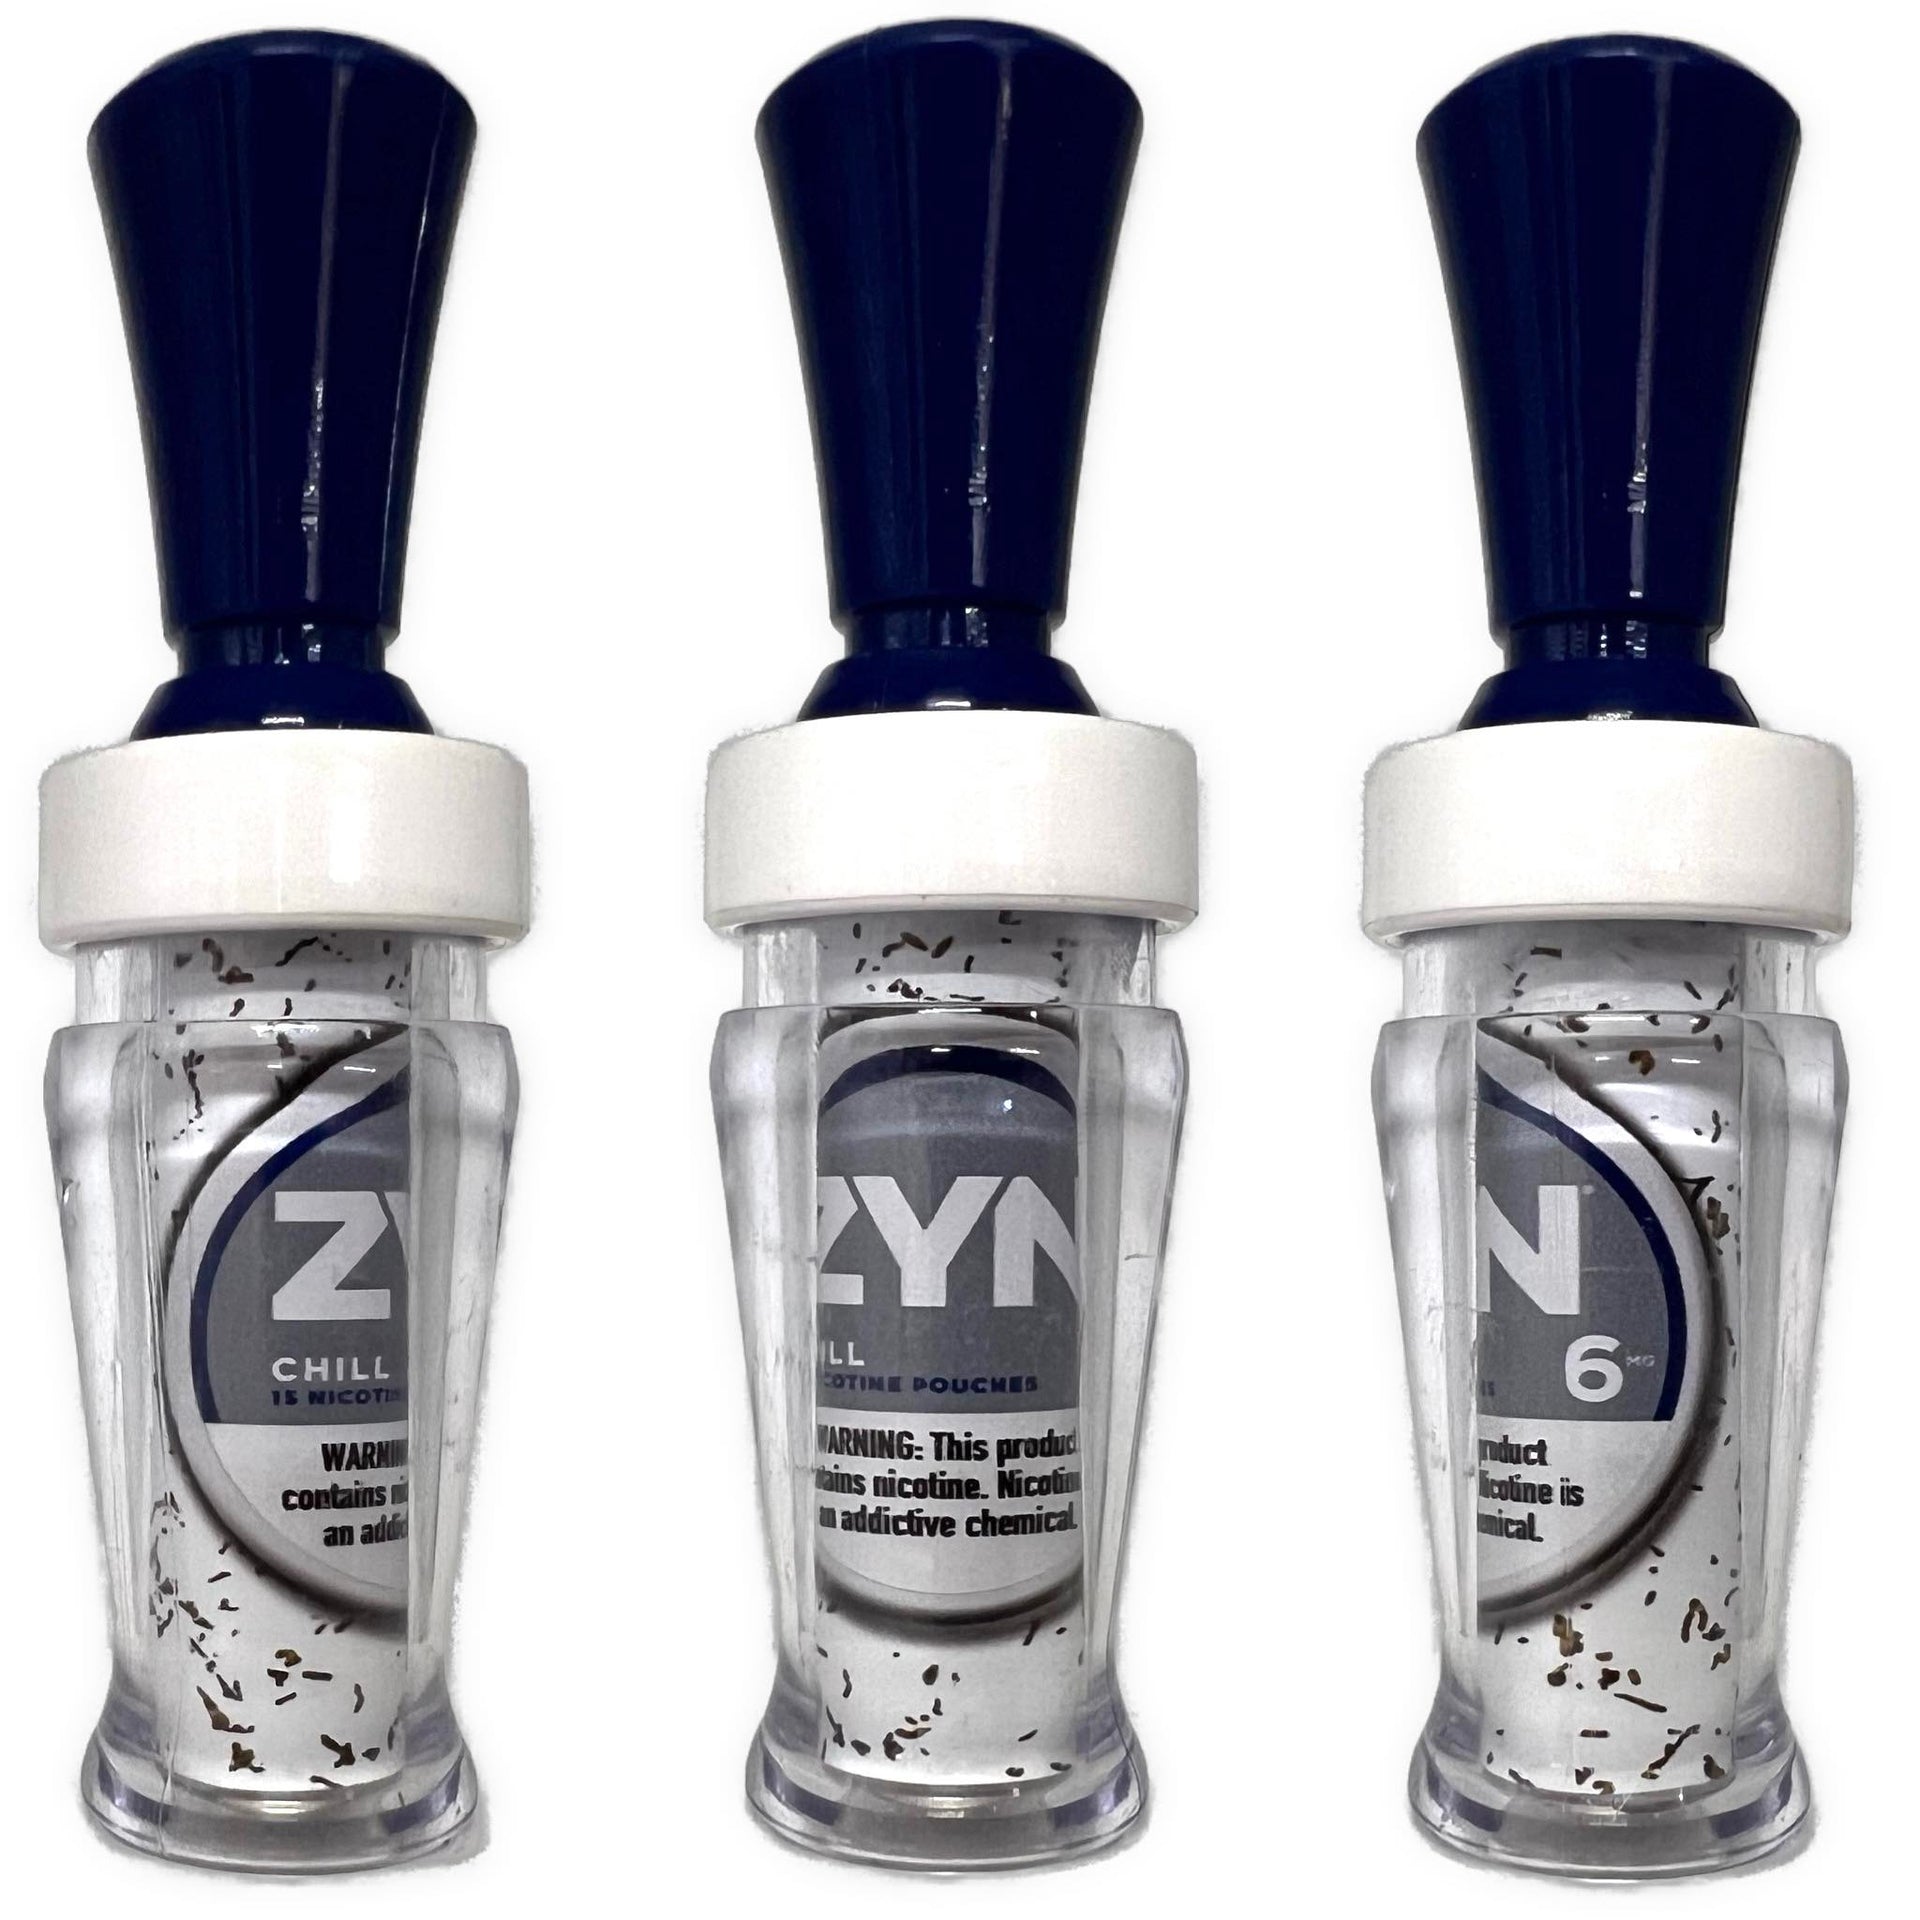 POLYCARBONATE IMAGE DUCK CALL ZYN CHILL – Iowa Hunting Products